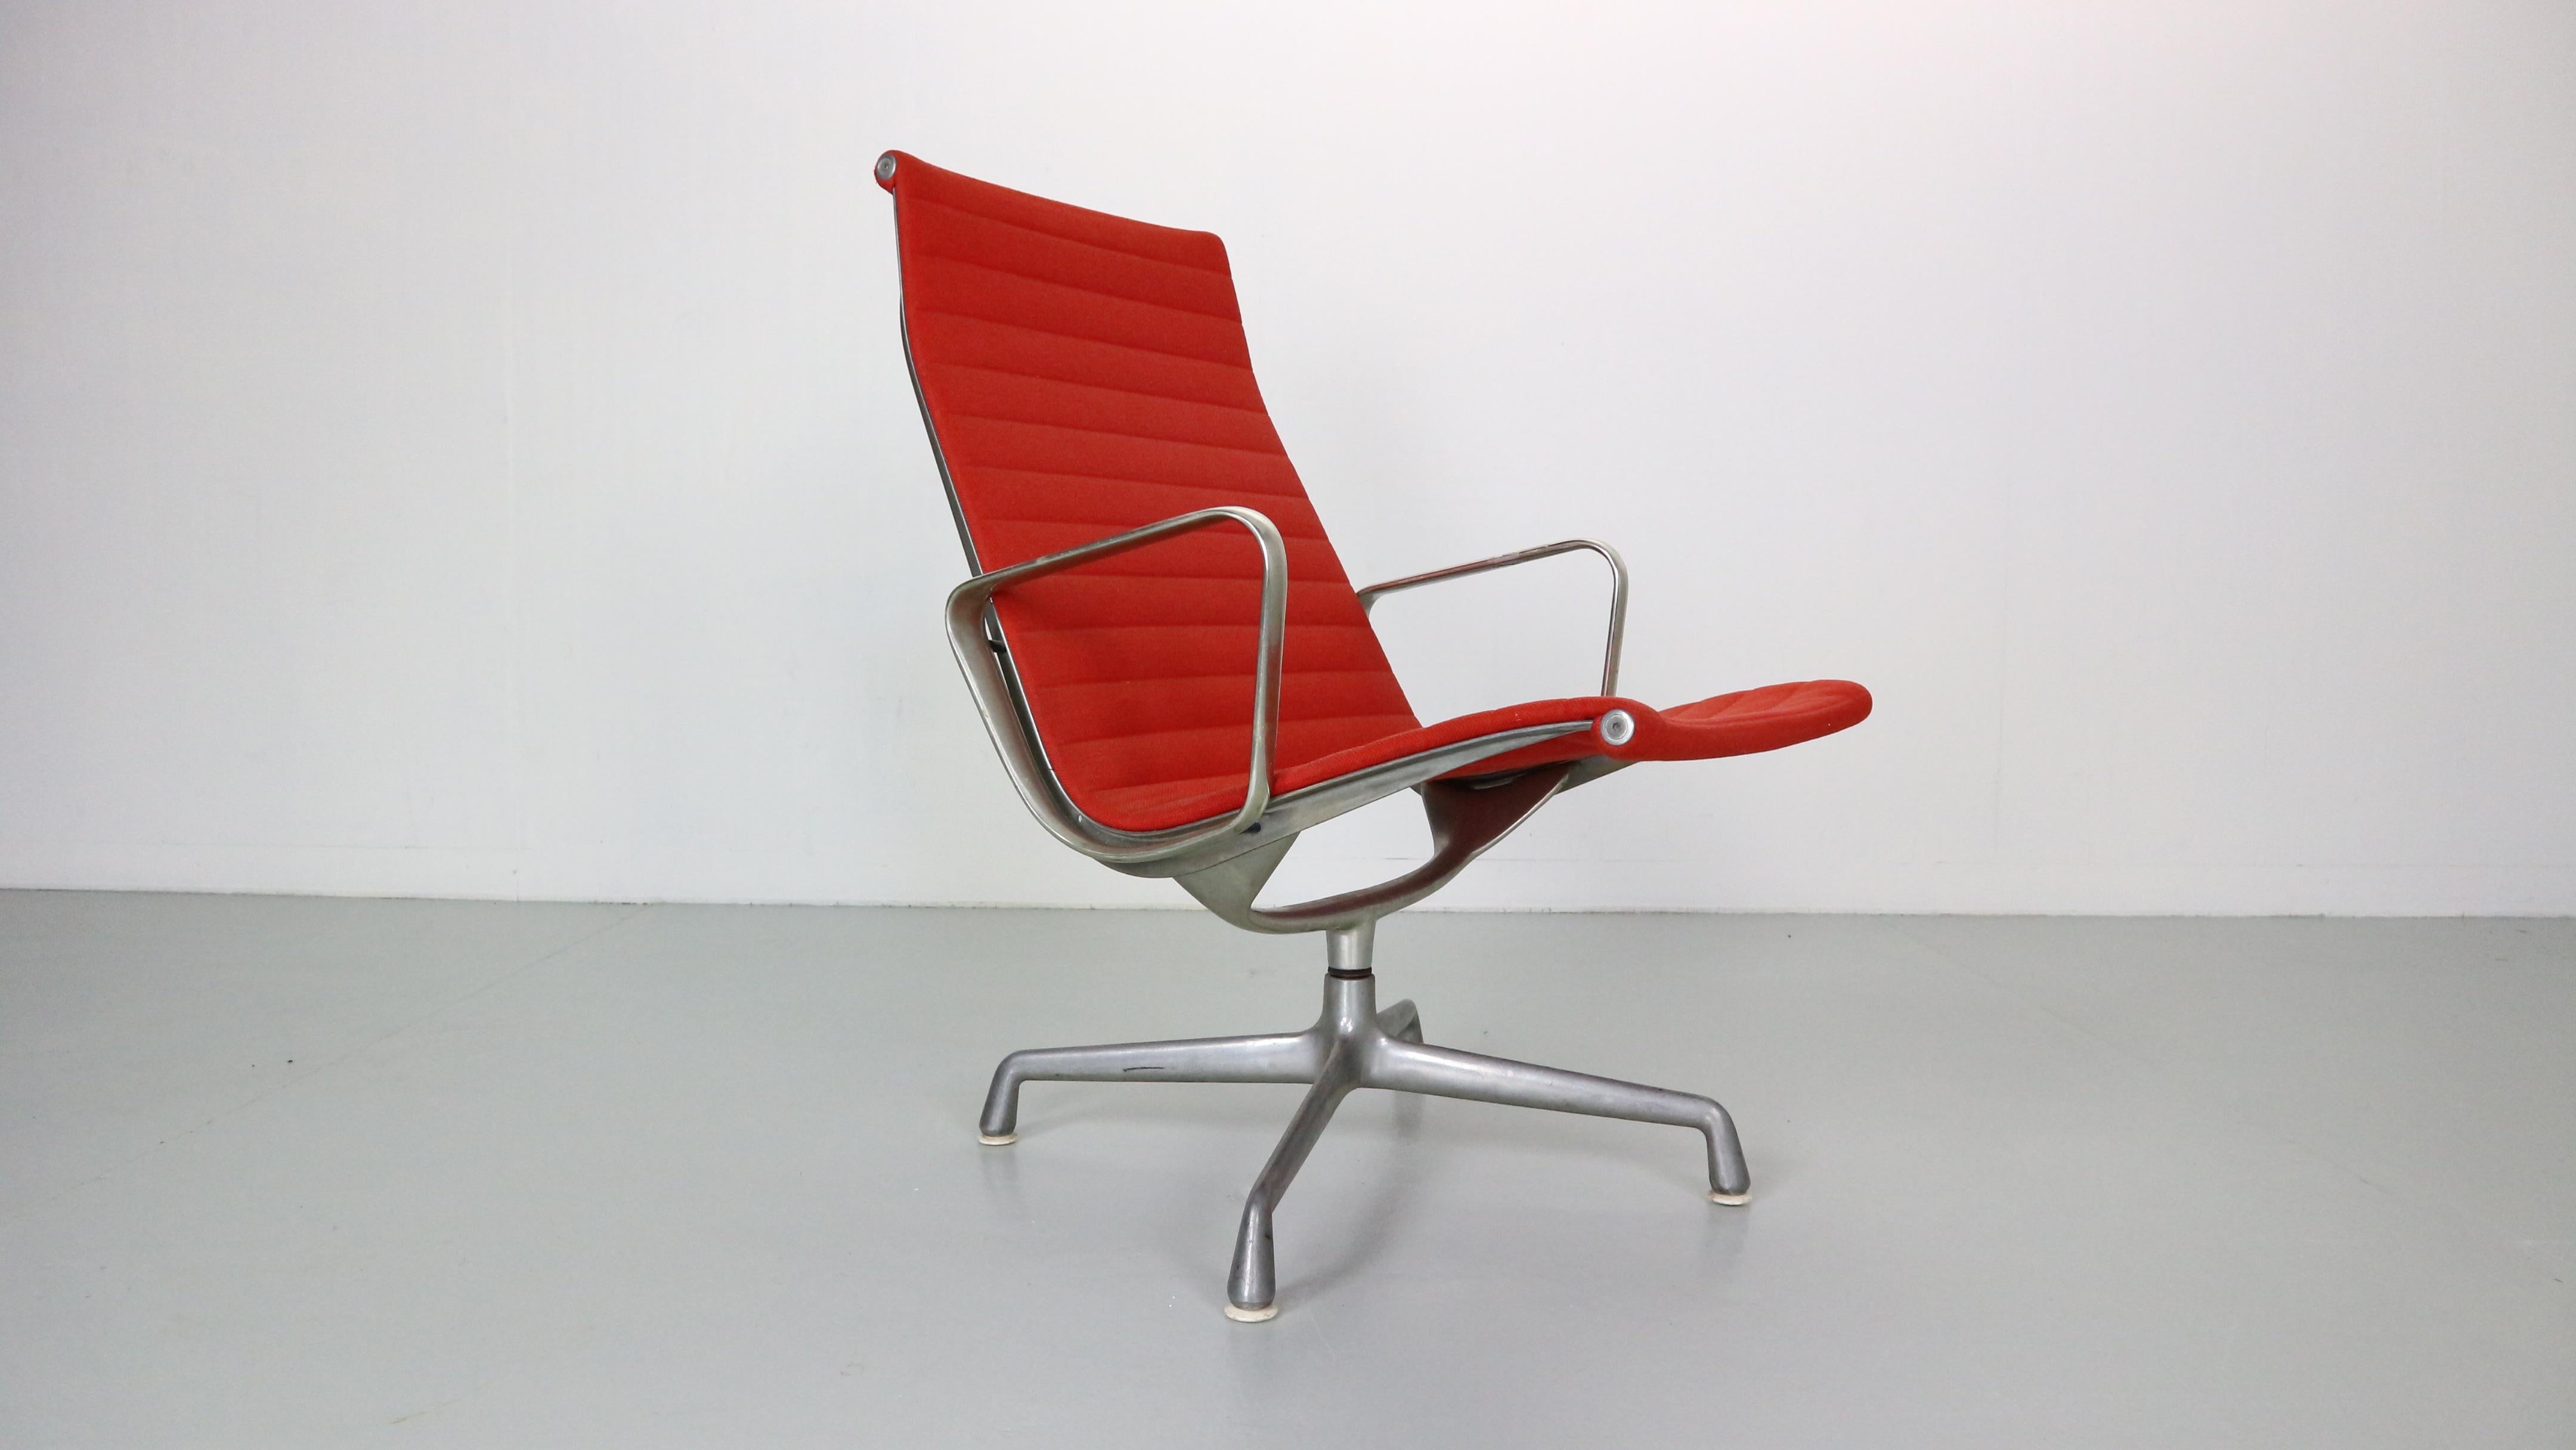 Designers: Charles and Ray Eames.
Maker: Vitra - 1989.
Design year: 1958.
Model: EA116 Hopsack (high back, arms and swivel).

The EA 116 Aluminium Group easy chair from 1958 is one of the greatest furniture designs of the 20th century. It